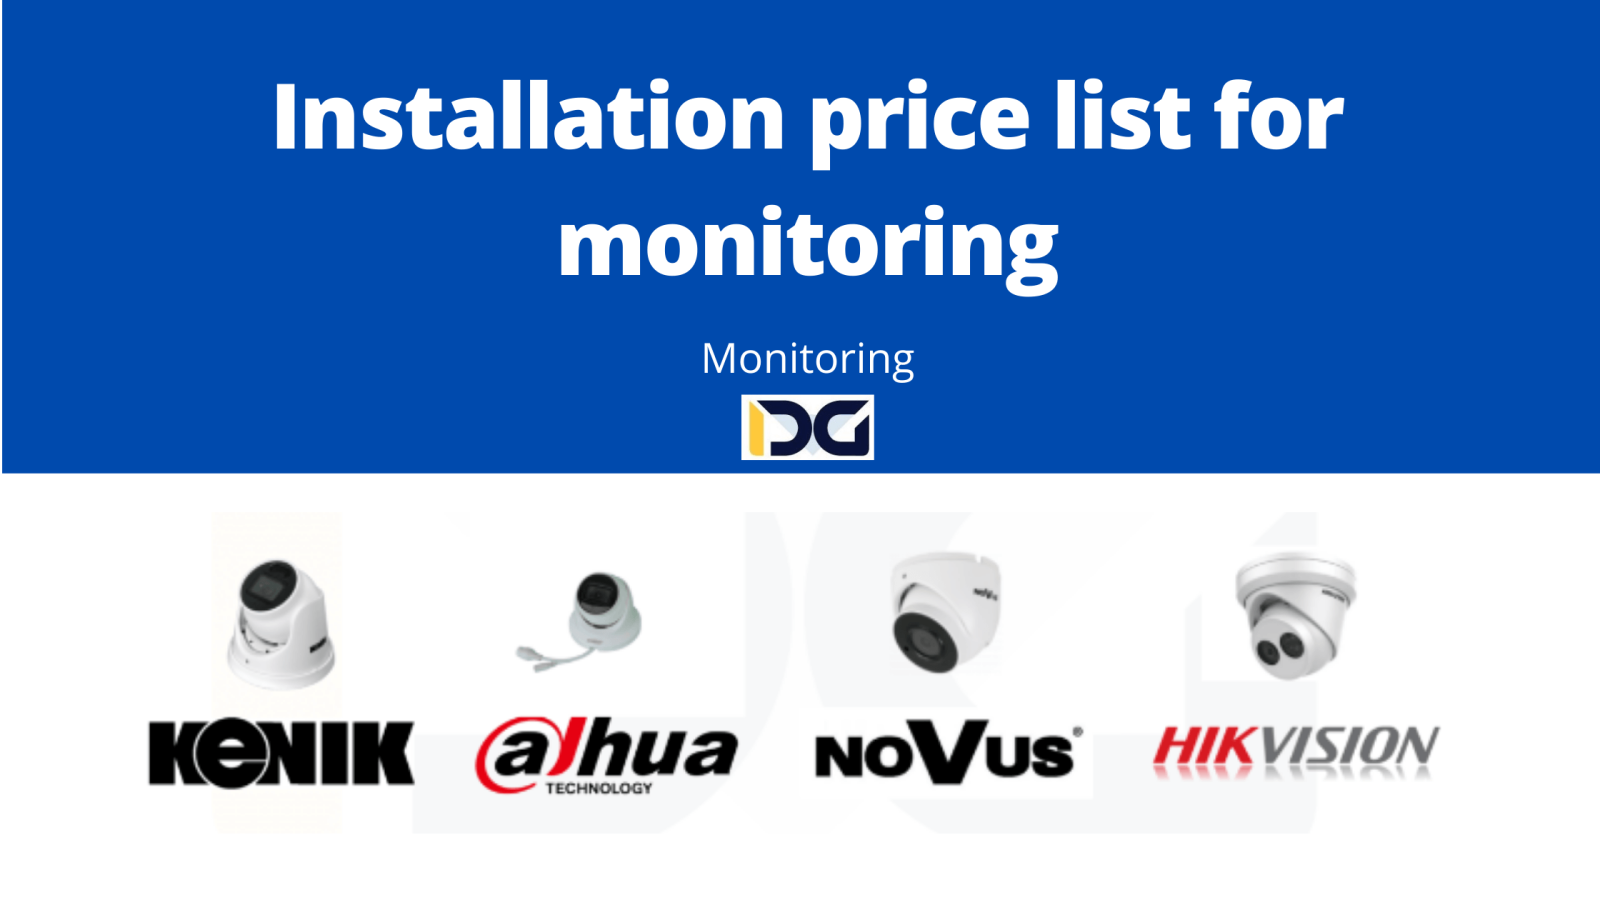 Installation price list for monitoring: How much does camera installation cost?